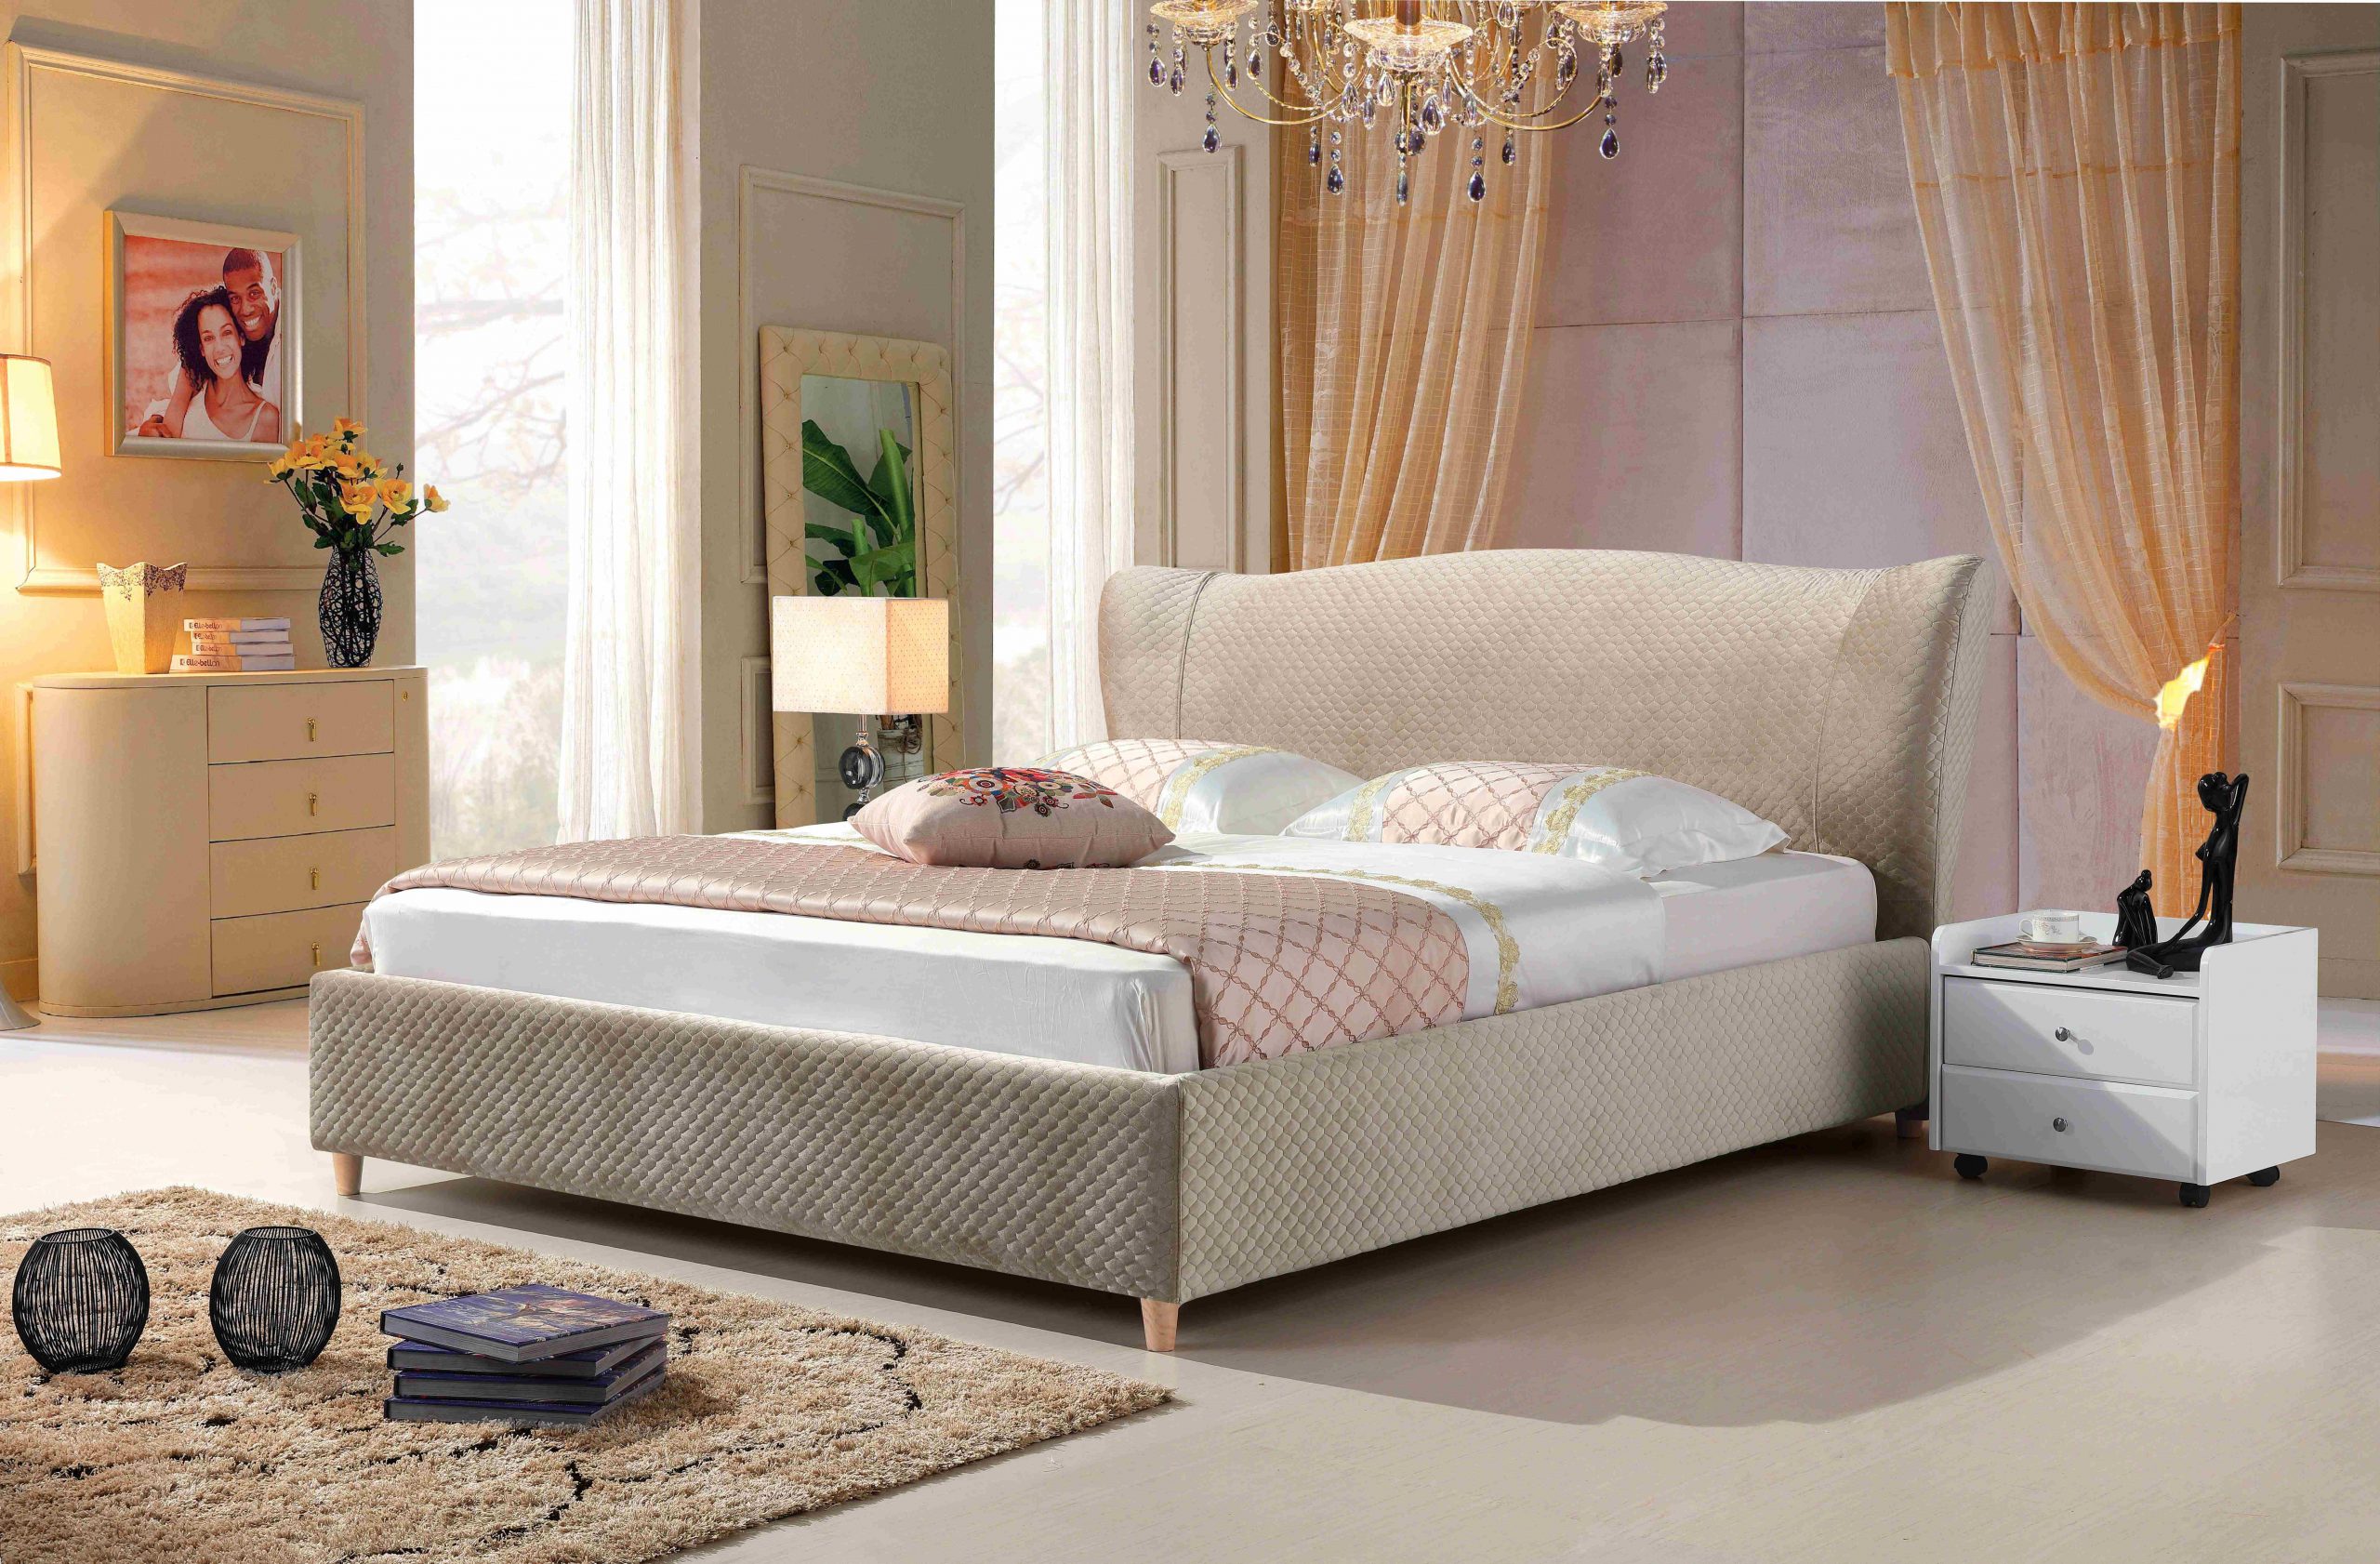 A8638-high quality upholstered fabric bed made by china luxury and modern furniture factory and company-furbyme